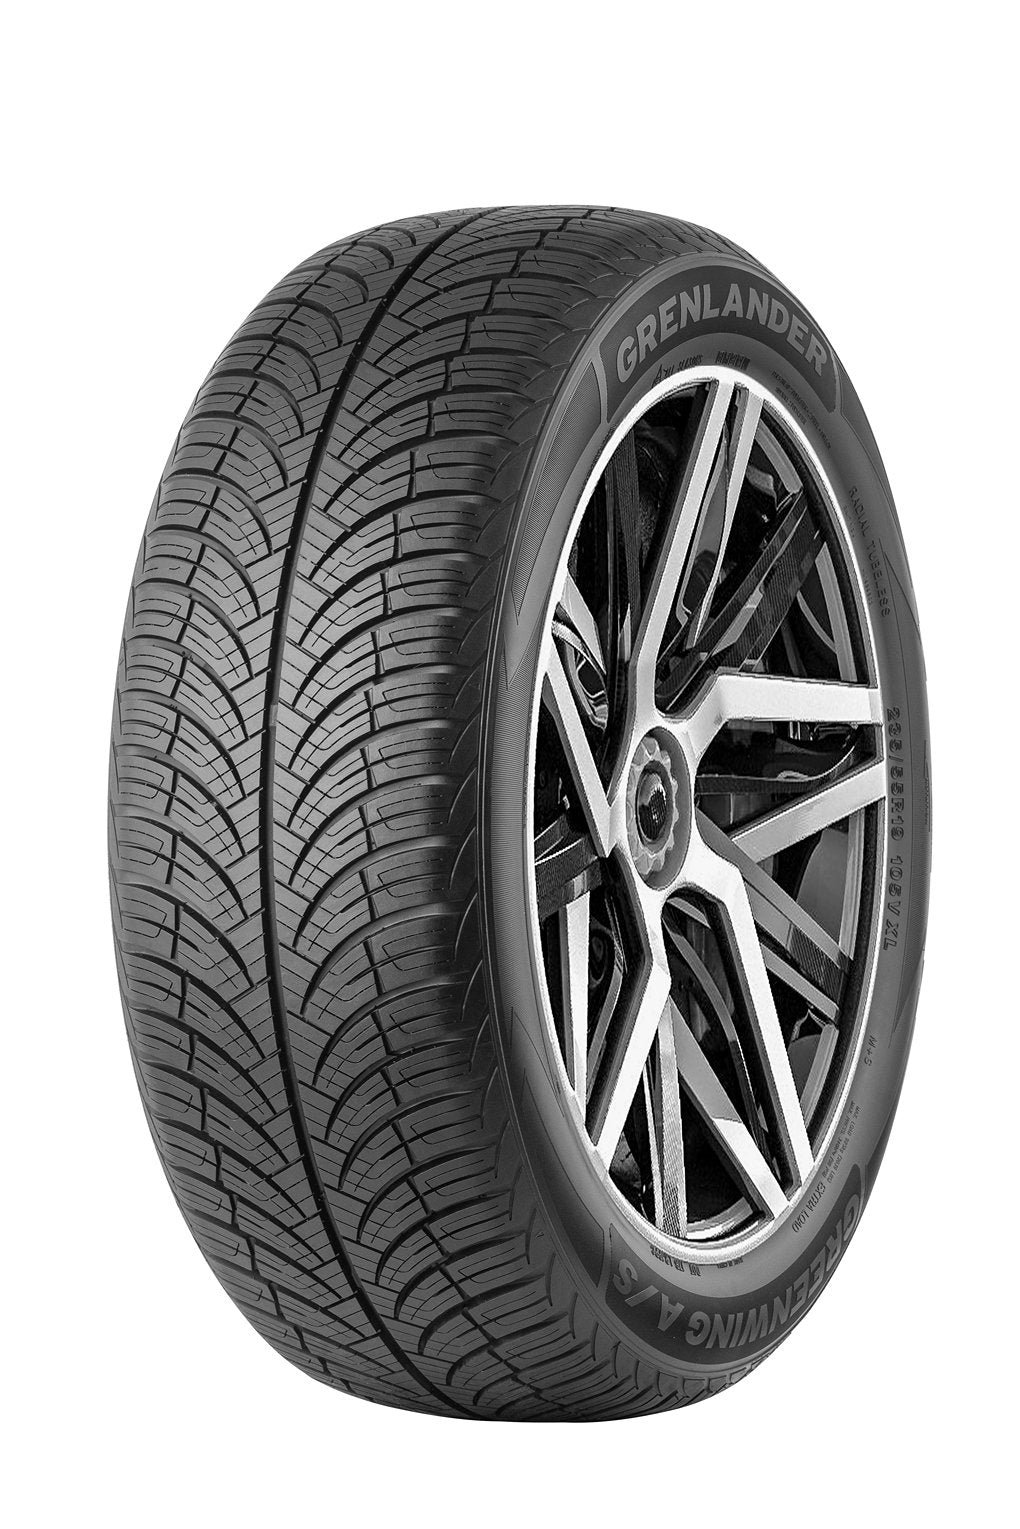 235/55R19 GRENLANDER GREENWING A/S ALL WEATHER - Toee Tire